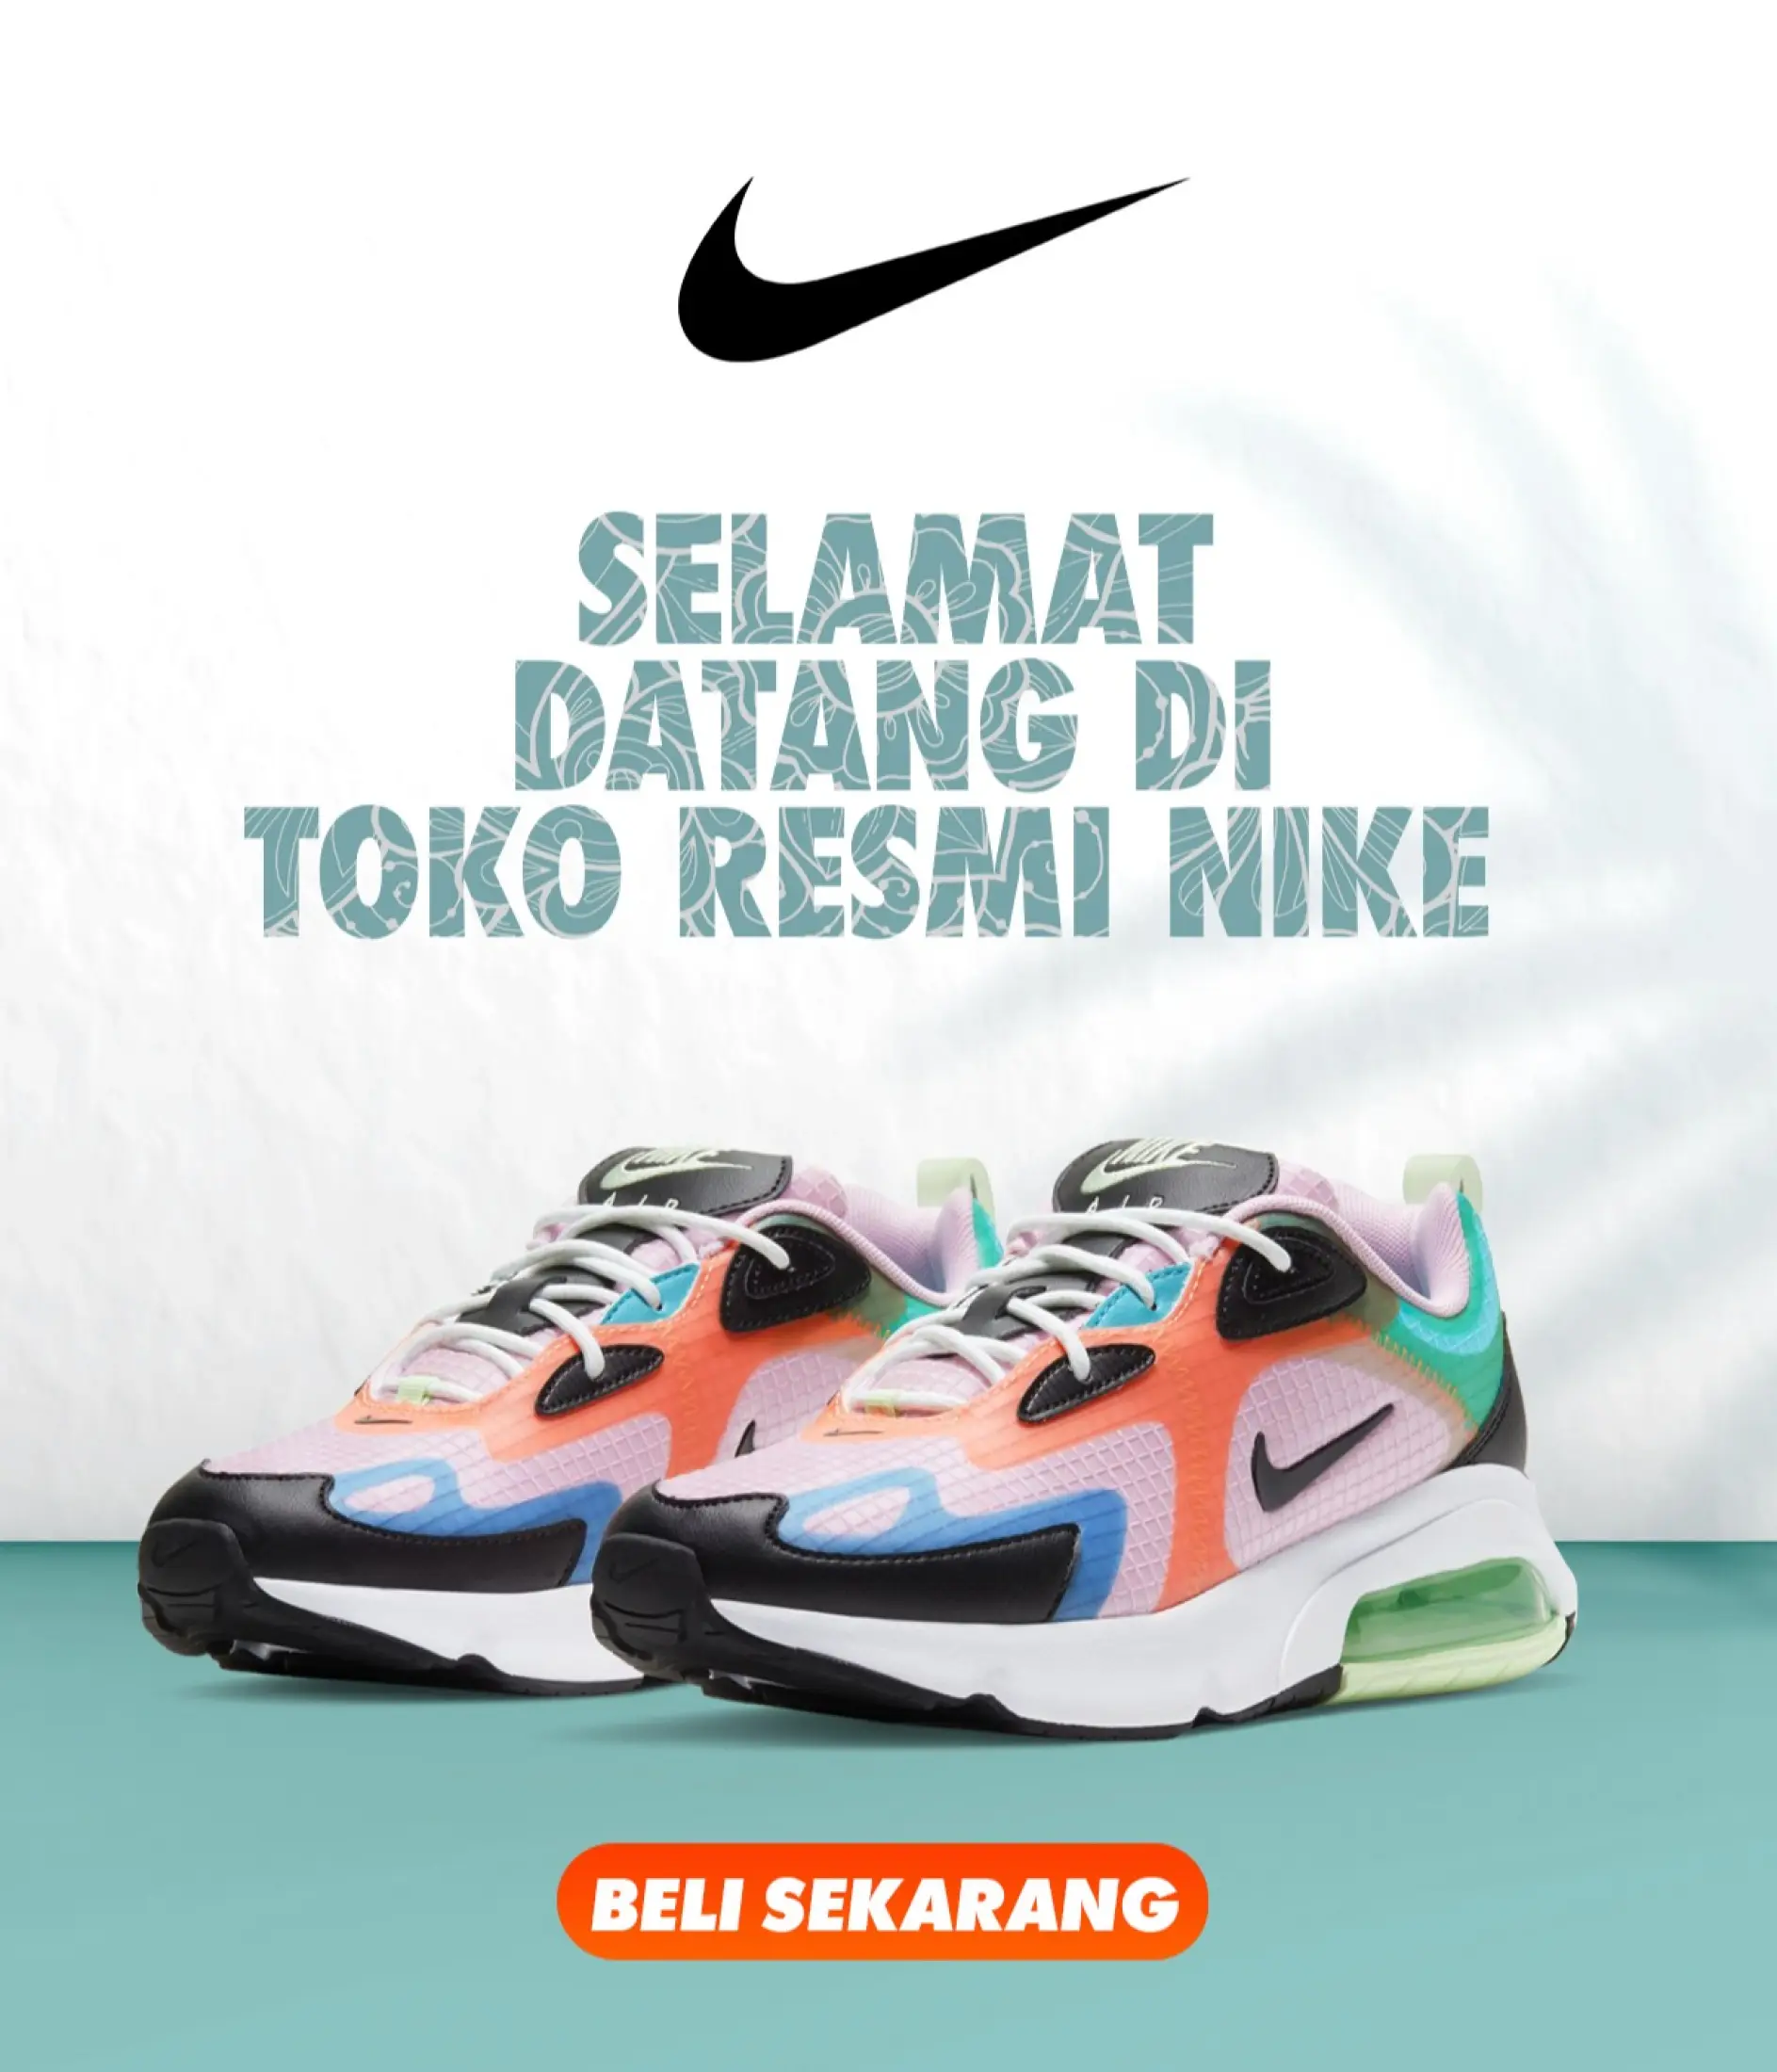 nike official store lazada